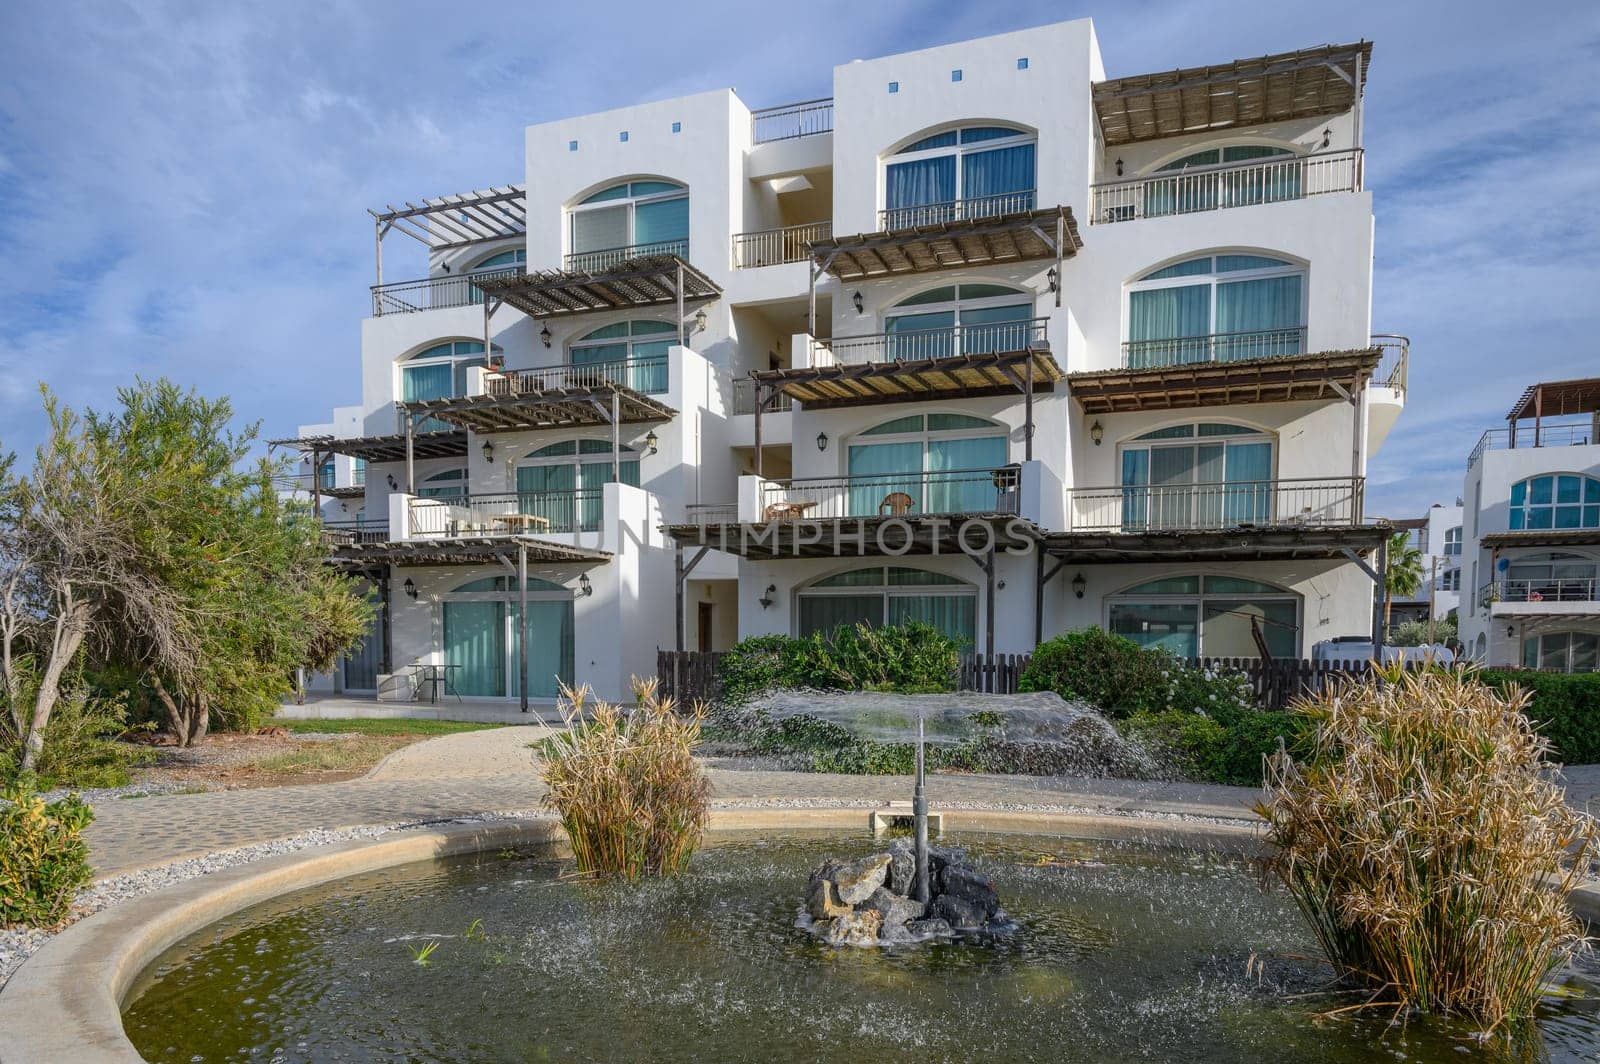 a fountain sprays water against the backdrop of a residential complex near the sea 1 by Mixa74